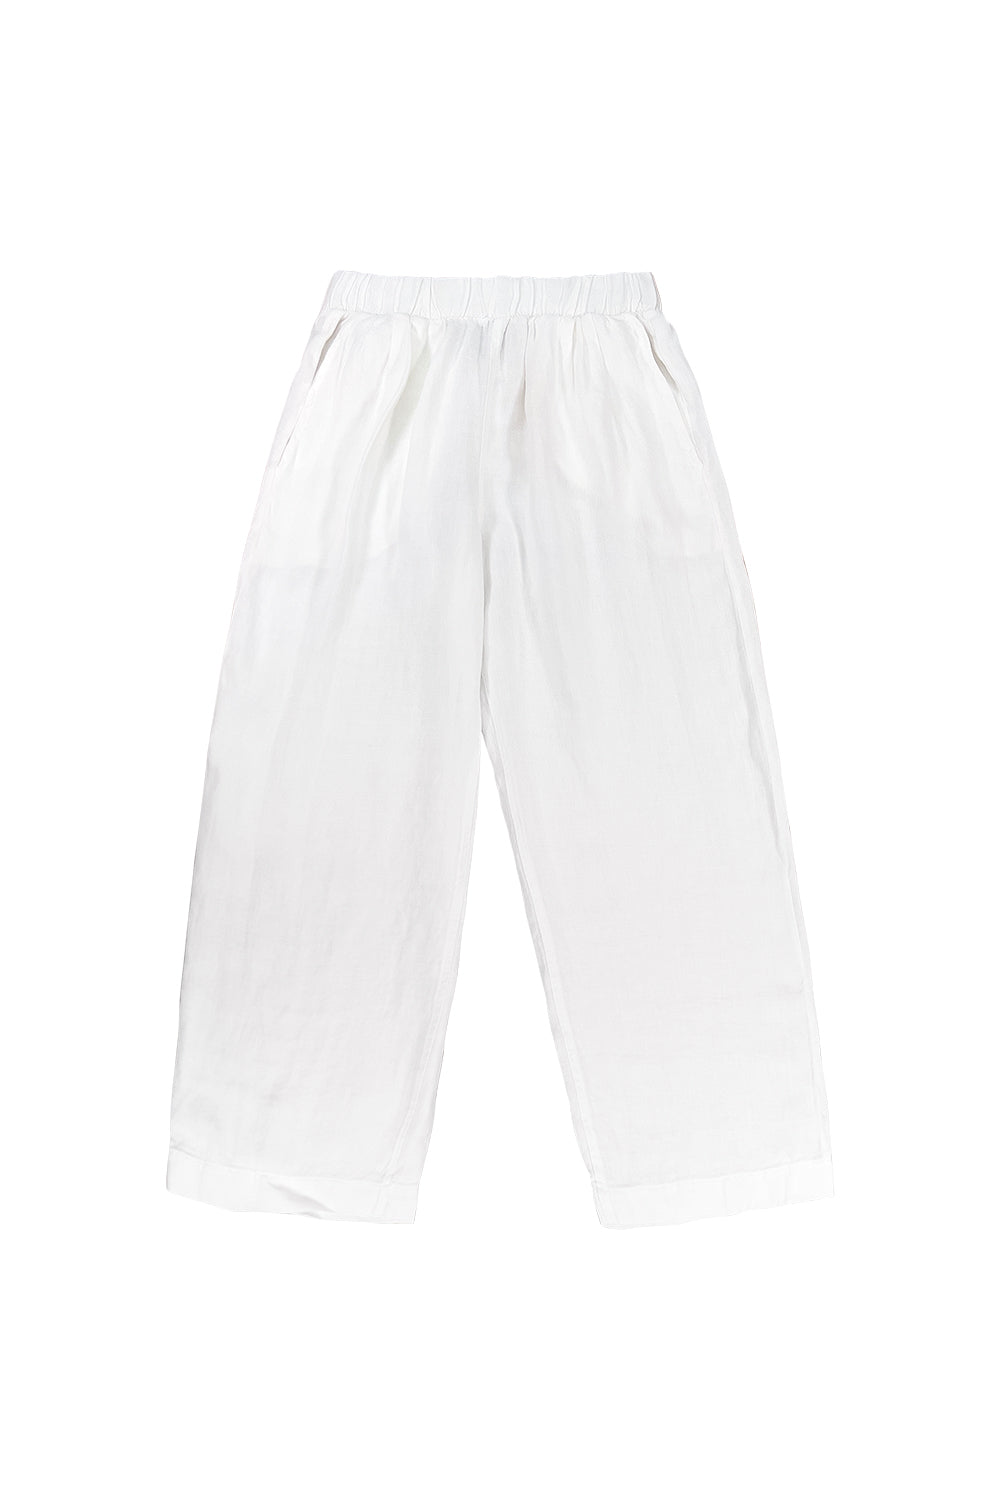 Cambria Pant | Jungmaven Hemp Clothing & Accessories / Color: Washed White